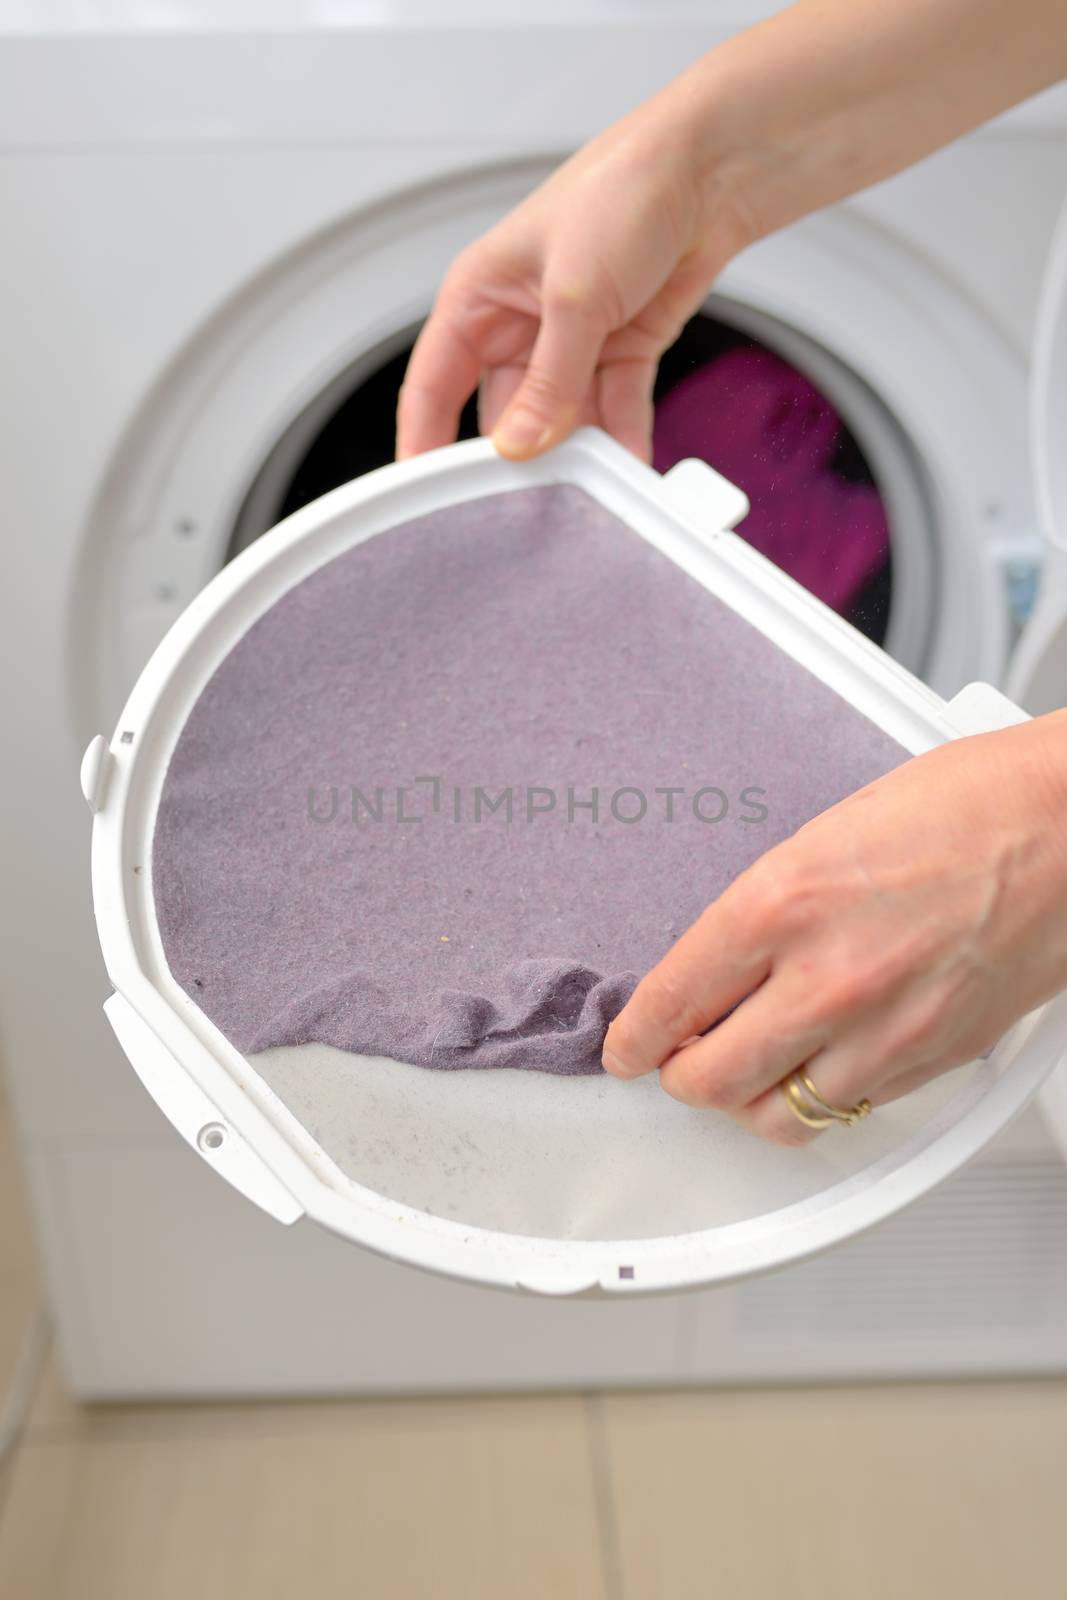 Woman Taking the lent of Dryer Machine